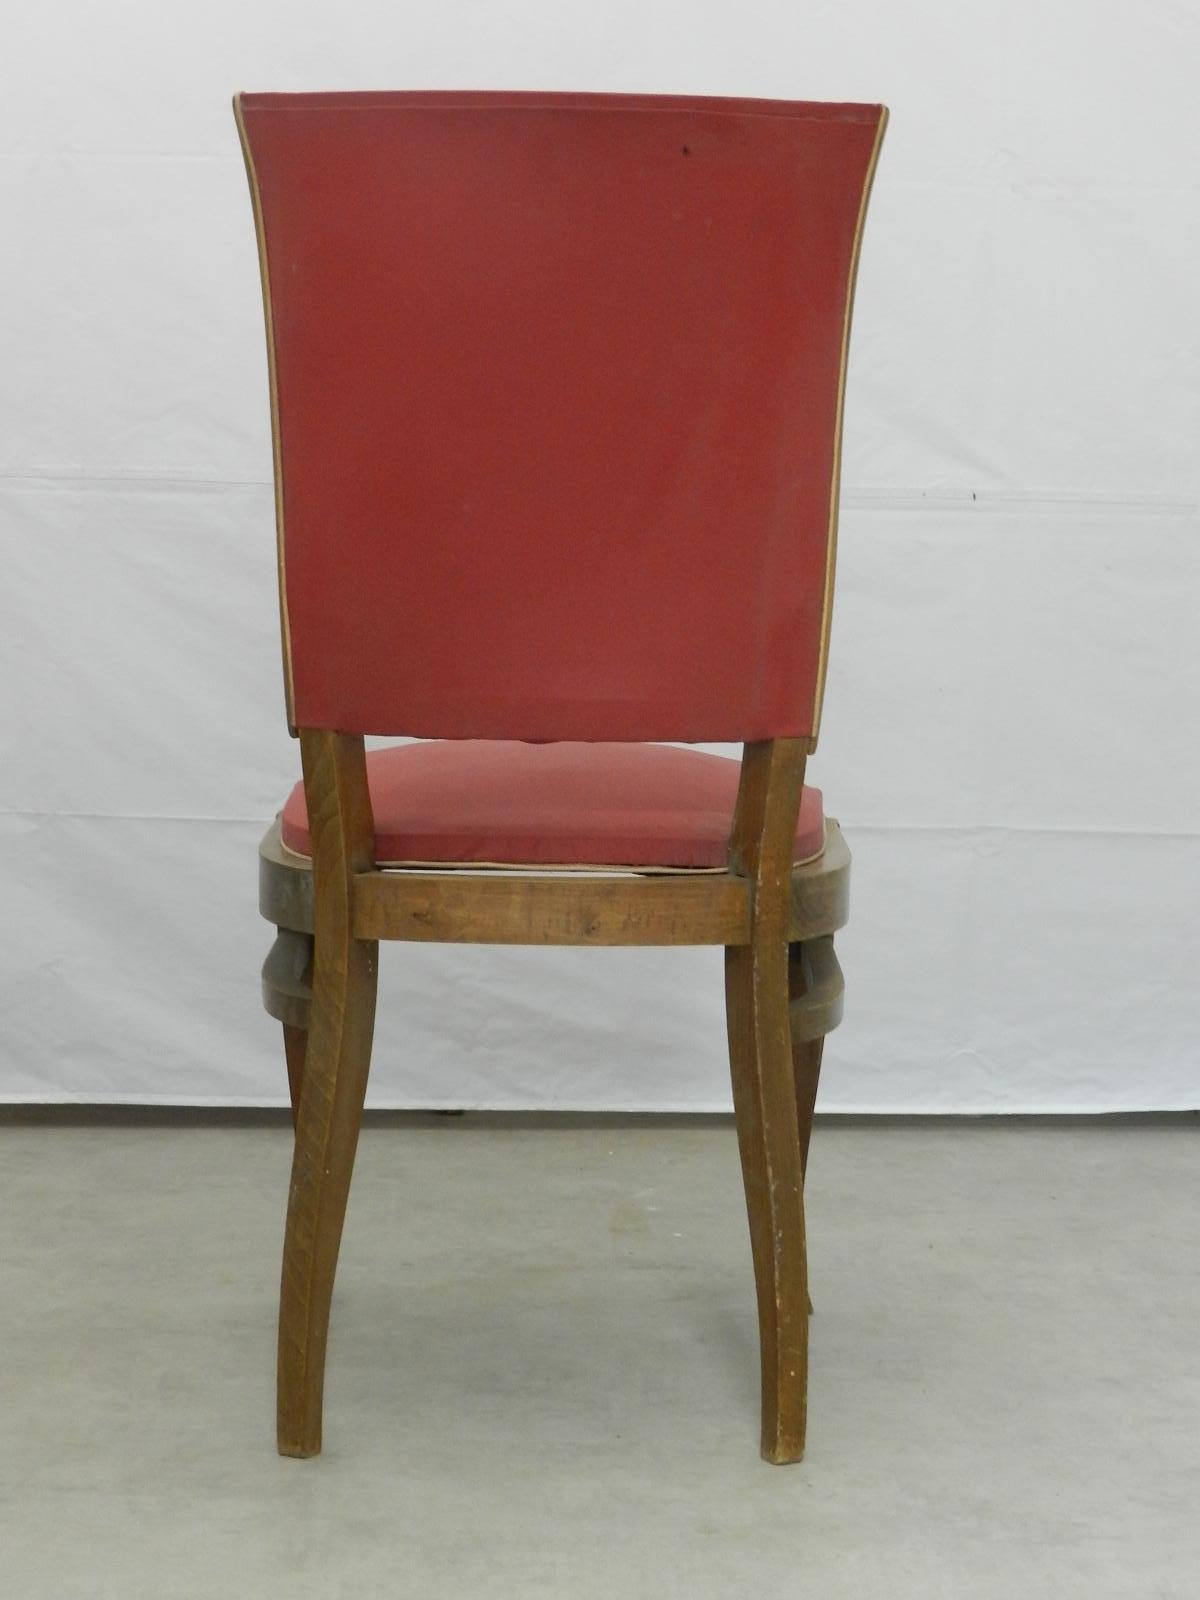 Six Art Deco Dining Chairs French to Recover / Restore, circa 1930 1